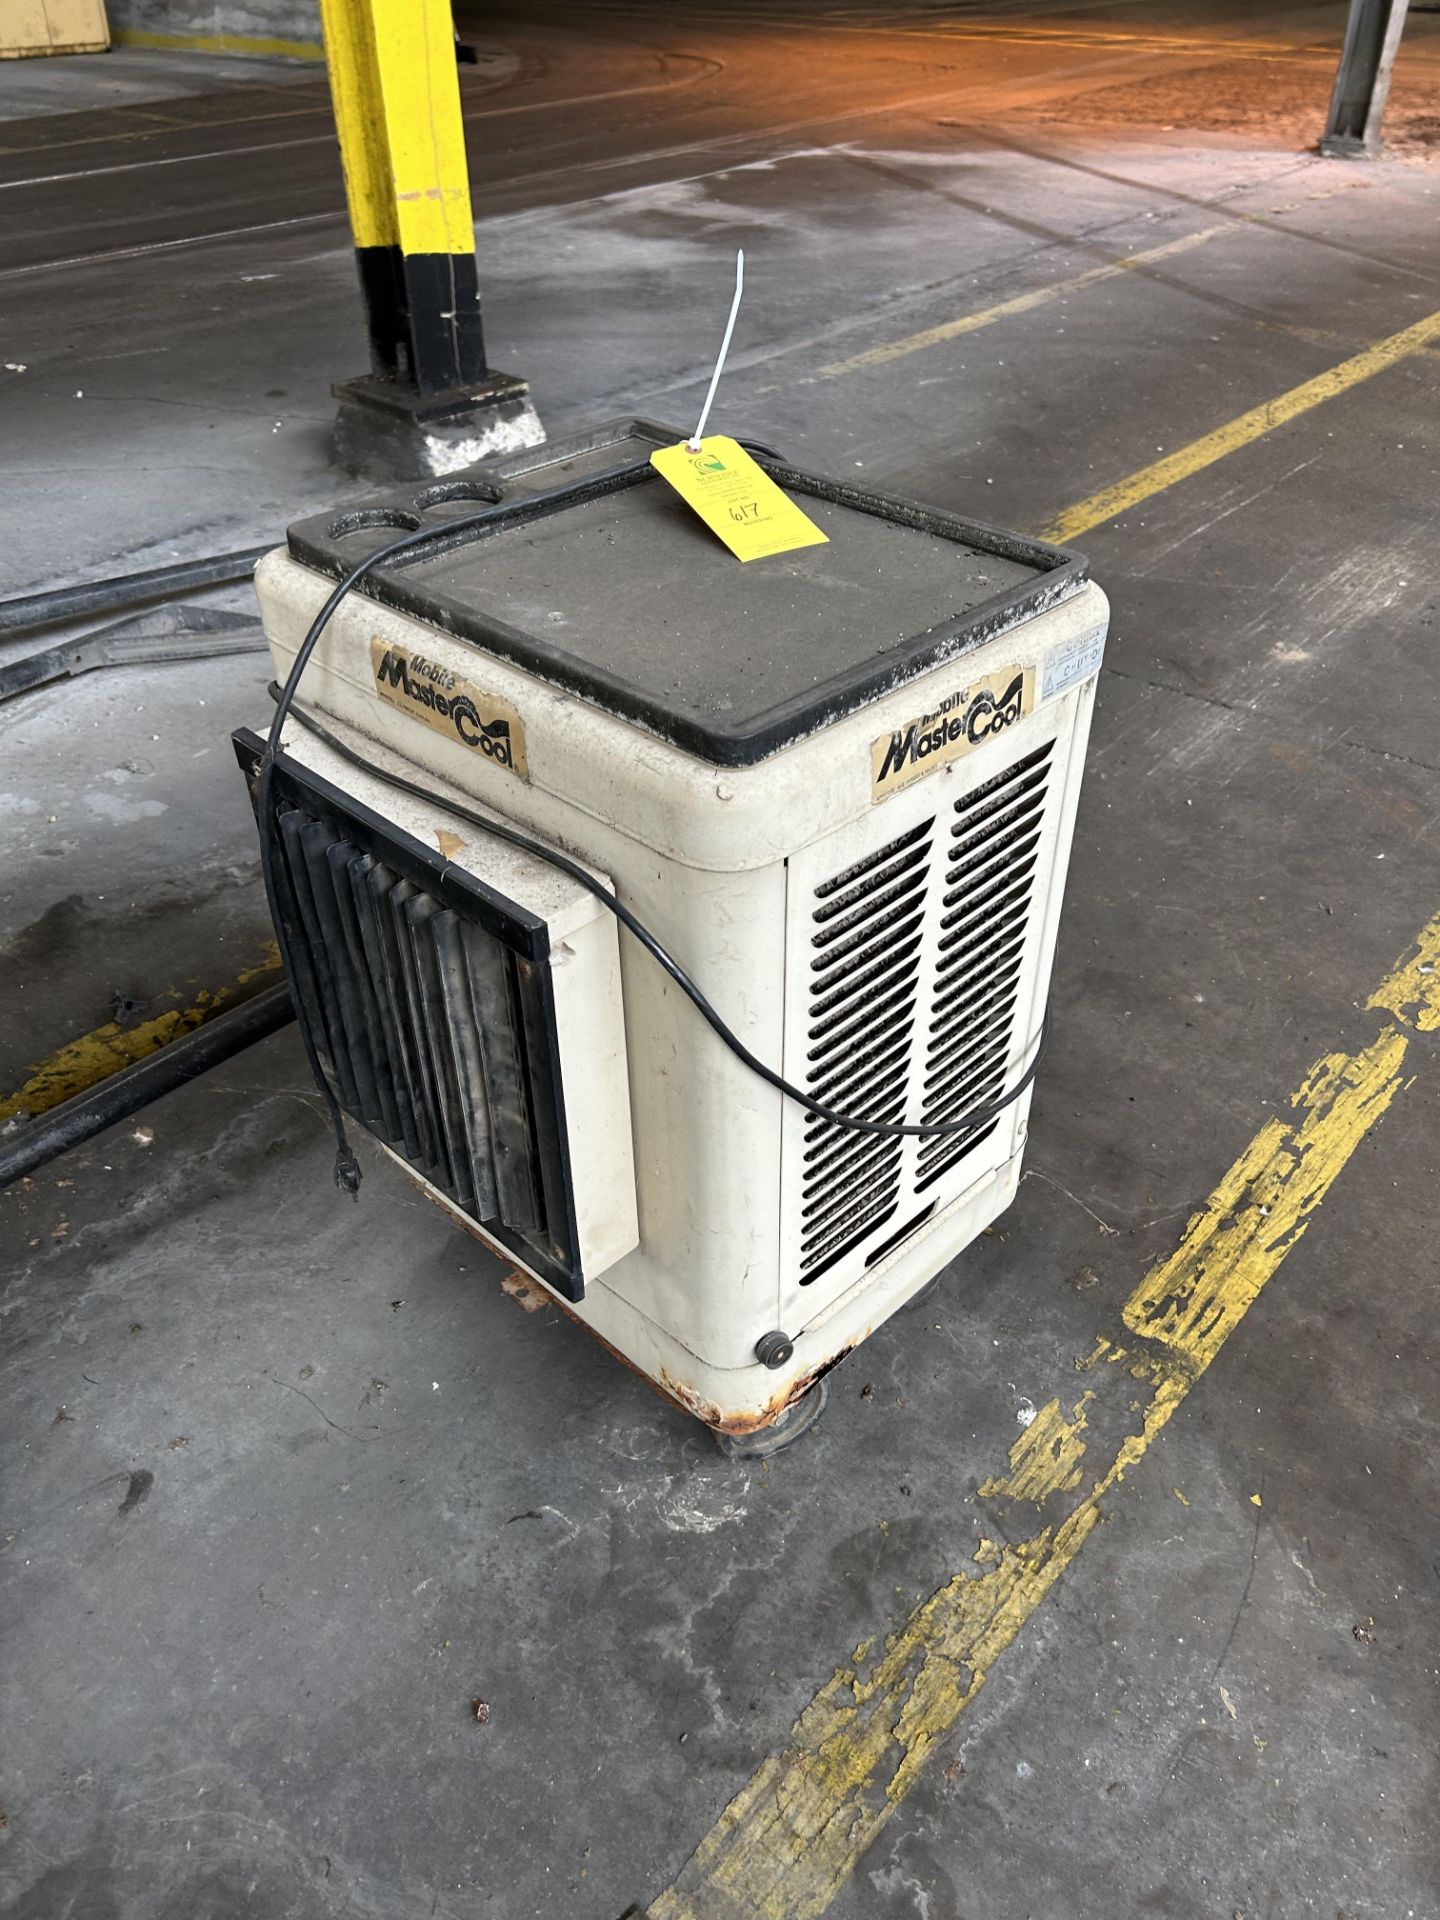 Master-Cool Portable Chiller, Rigging/ Removal Fee - $125